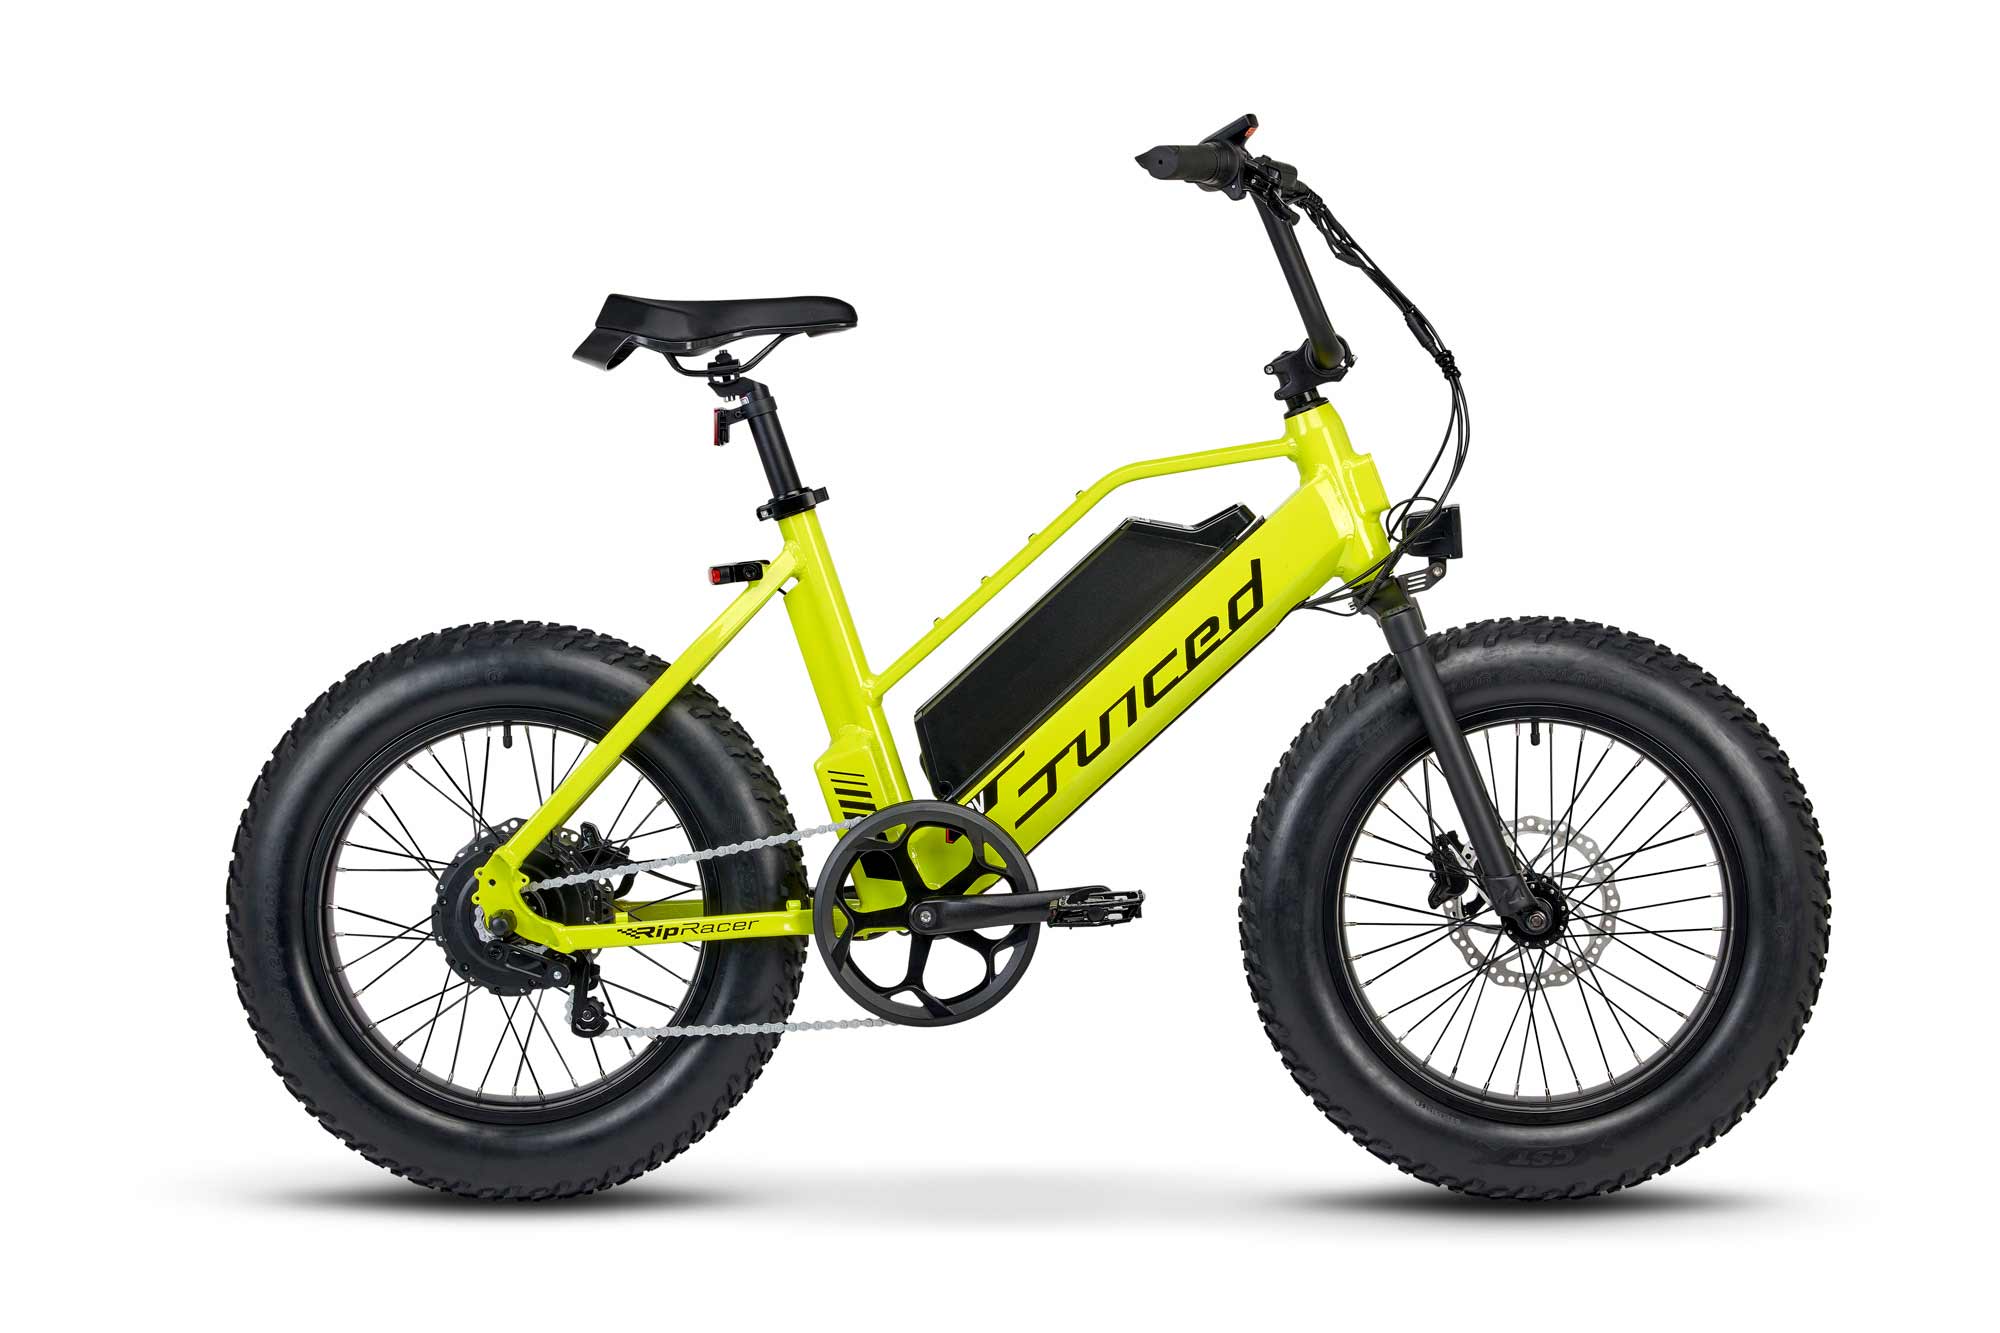 SALE Great Deals on High-Performance E-Bikes Juiced Bikes